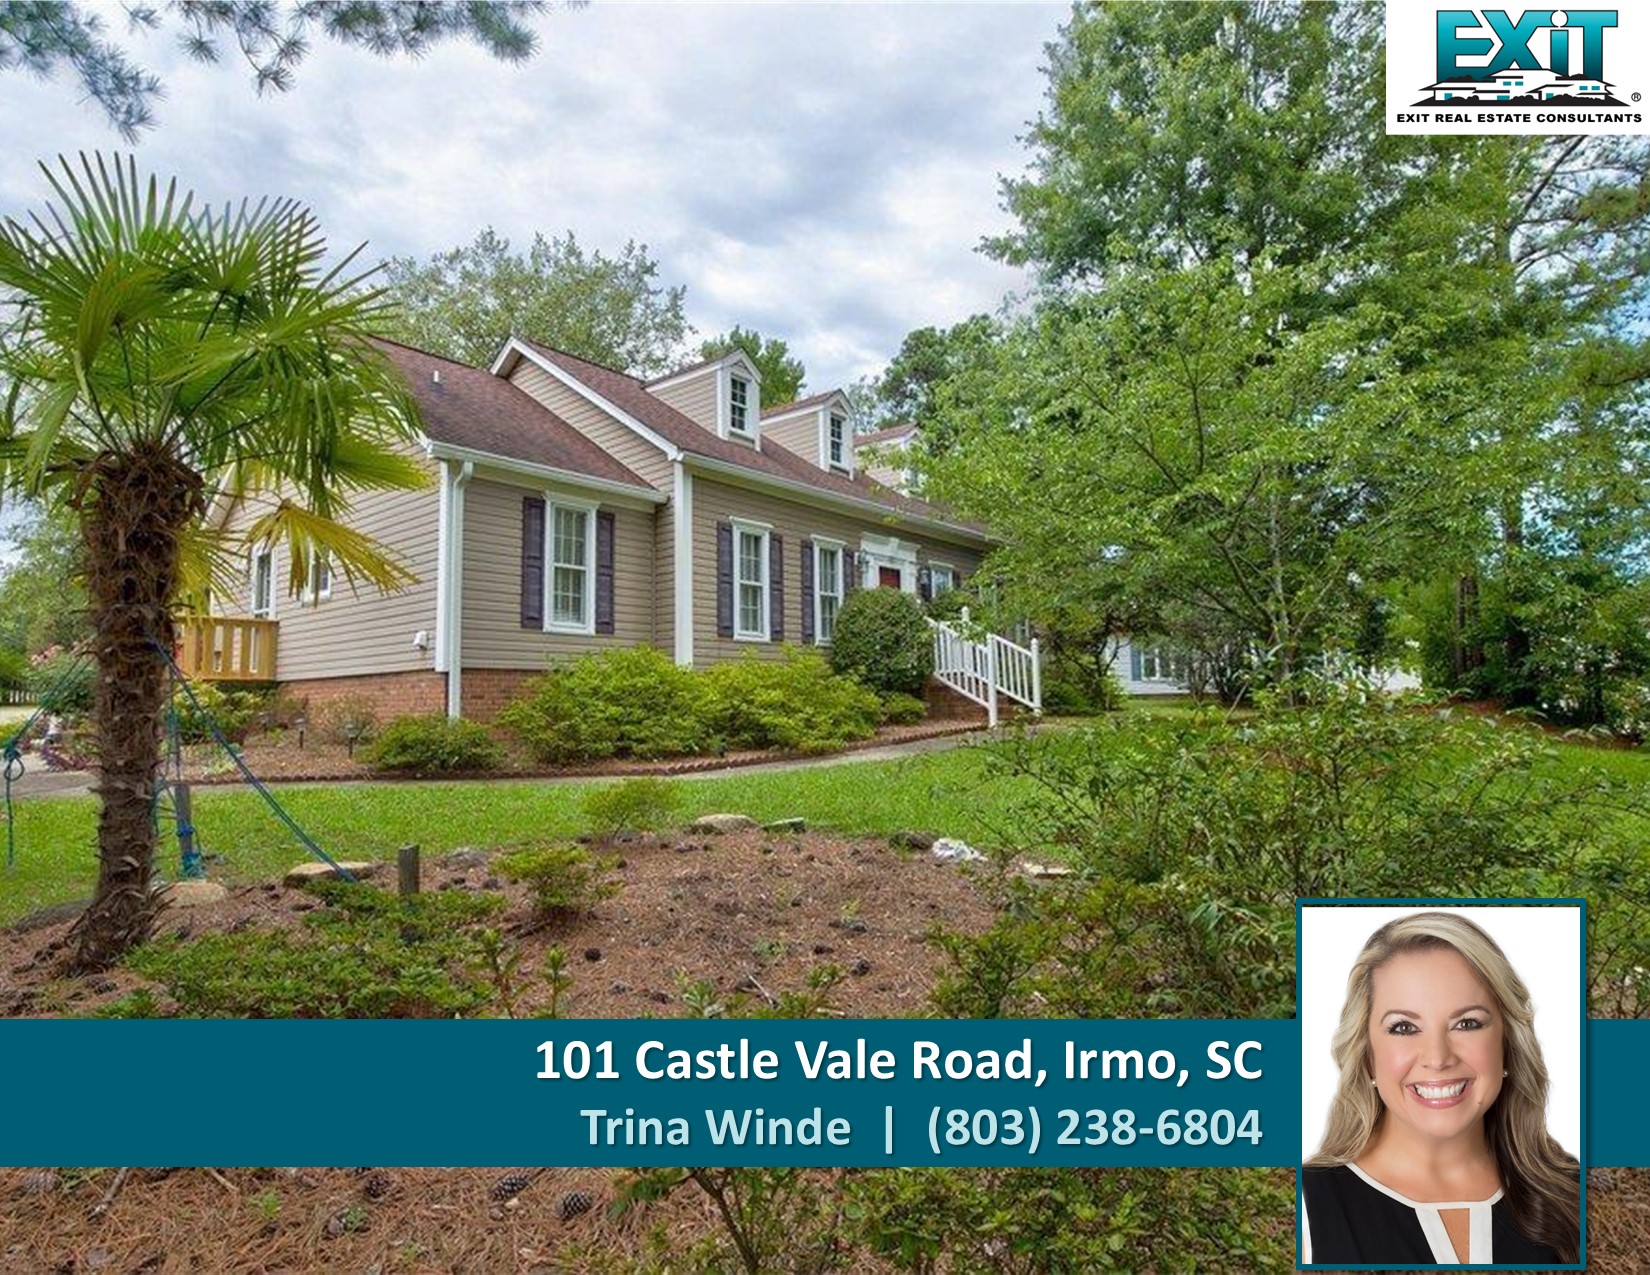 Just listed in Hidden Oaks - Irmo